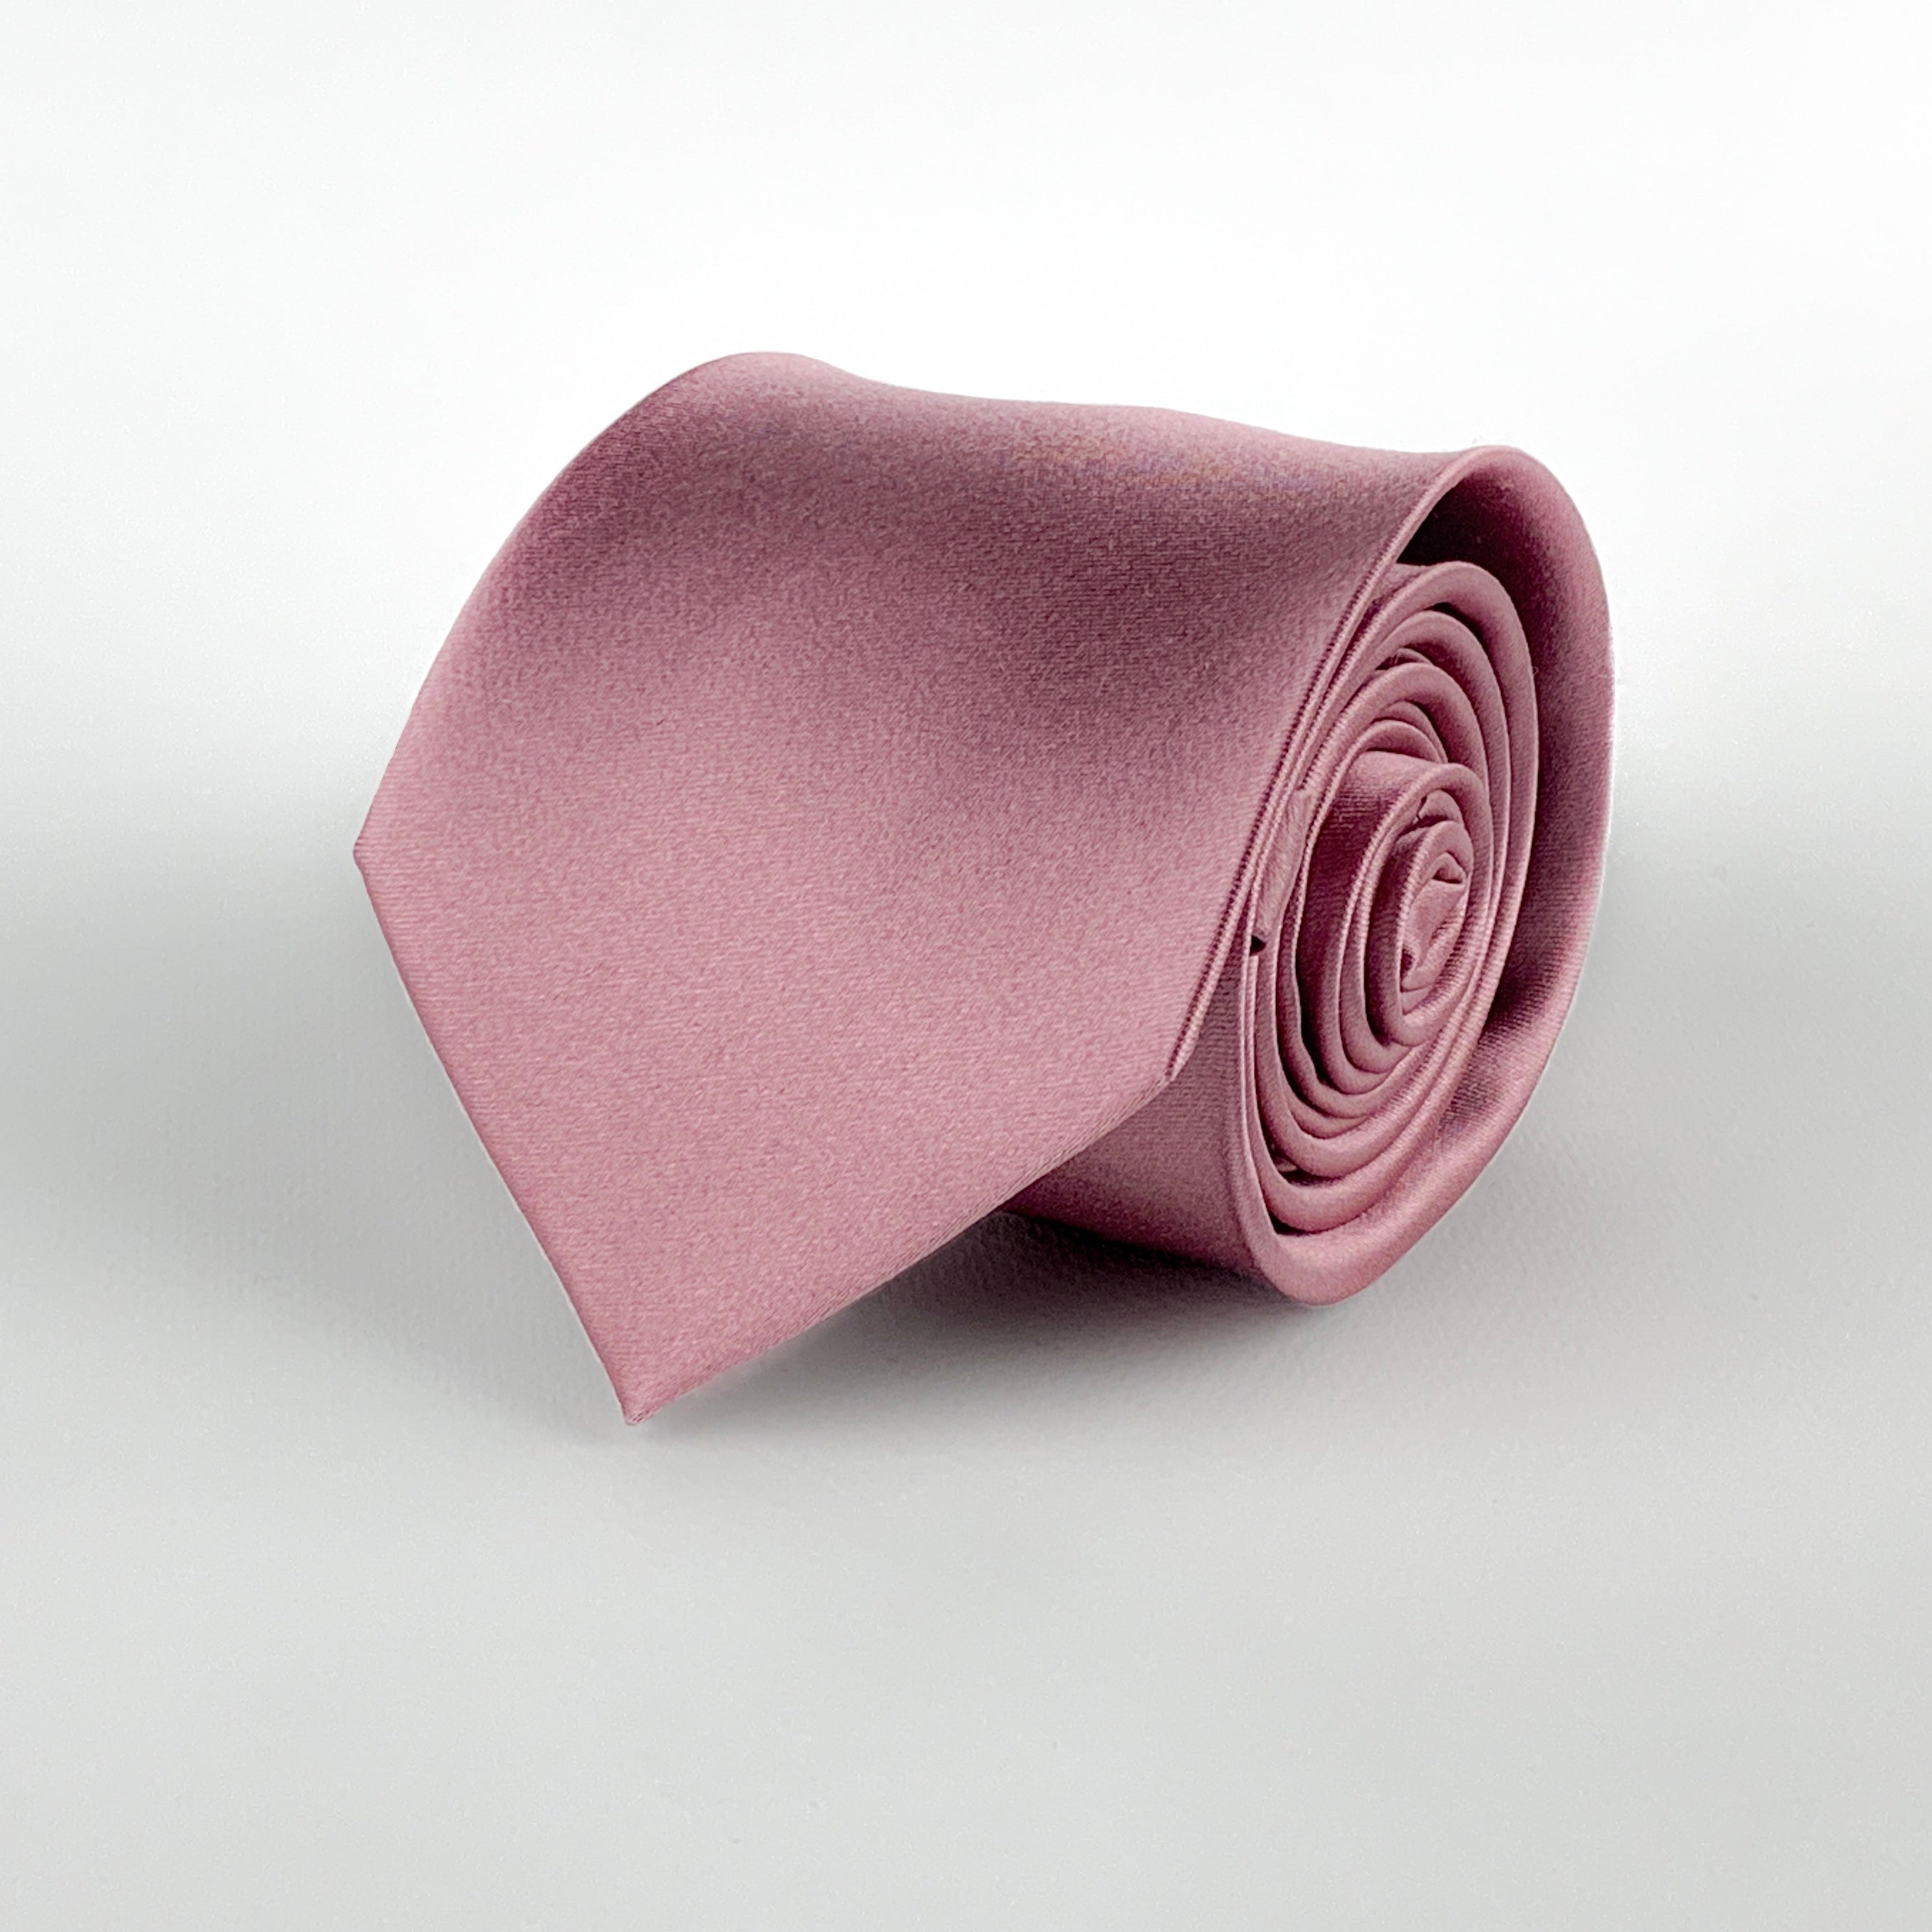 Tea pink mulberry silk satin tie rolled and placed on a white background